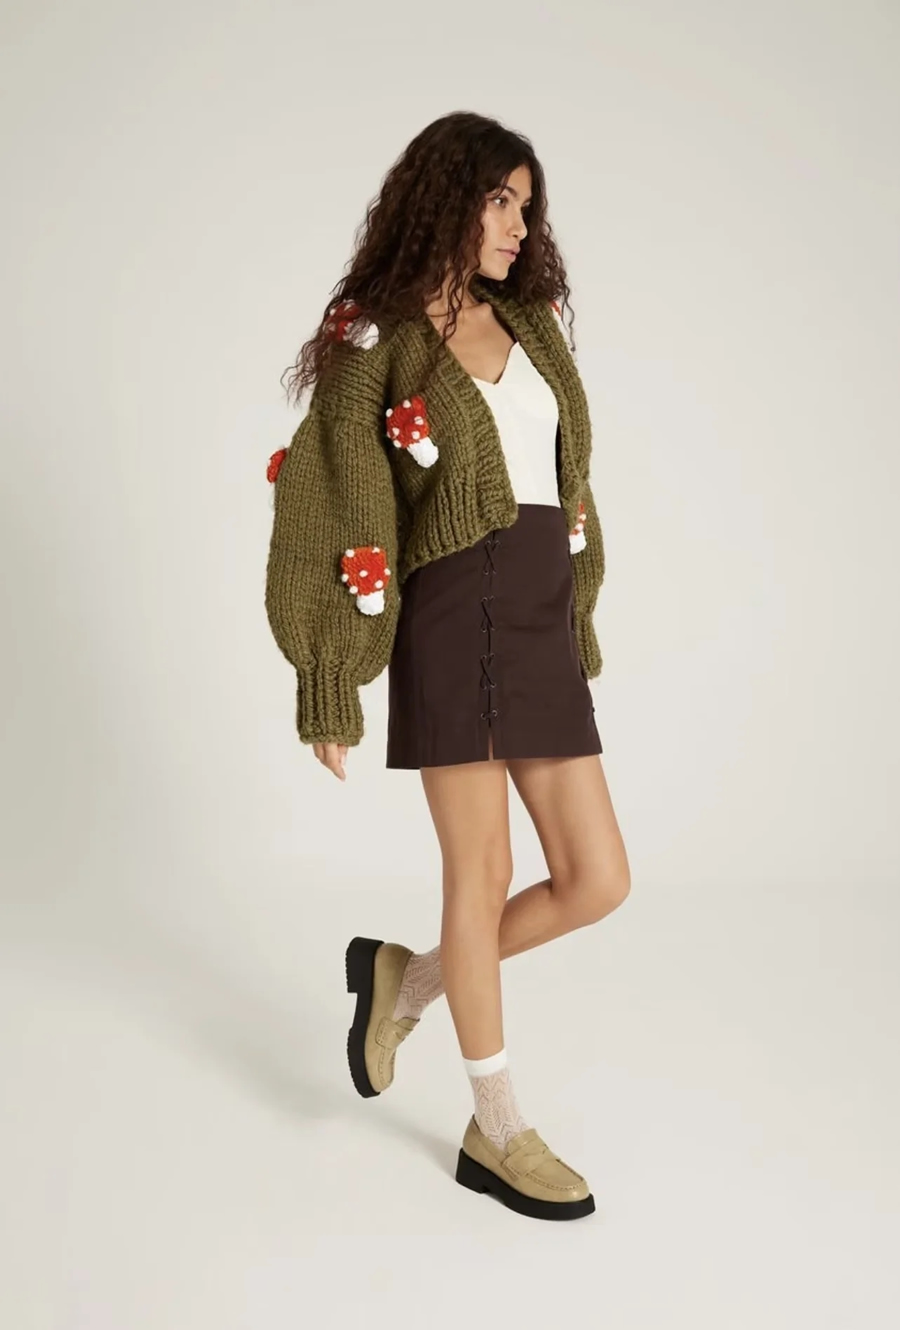 Fashion M Beige Mushroom Embroidered Buttoned Cardigan Jacket,Sweater